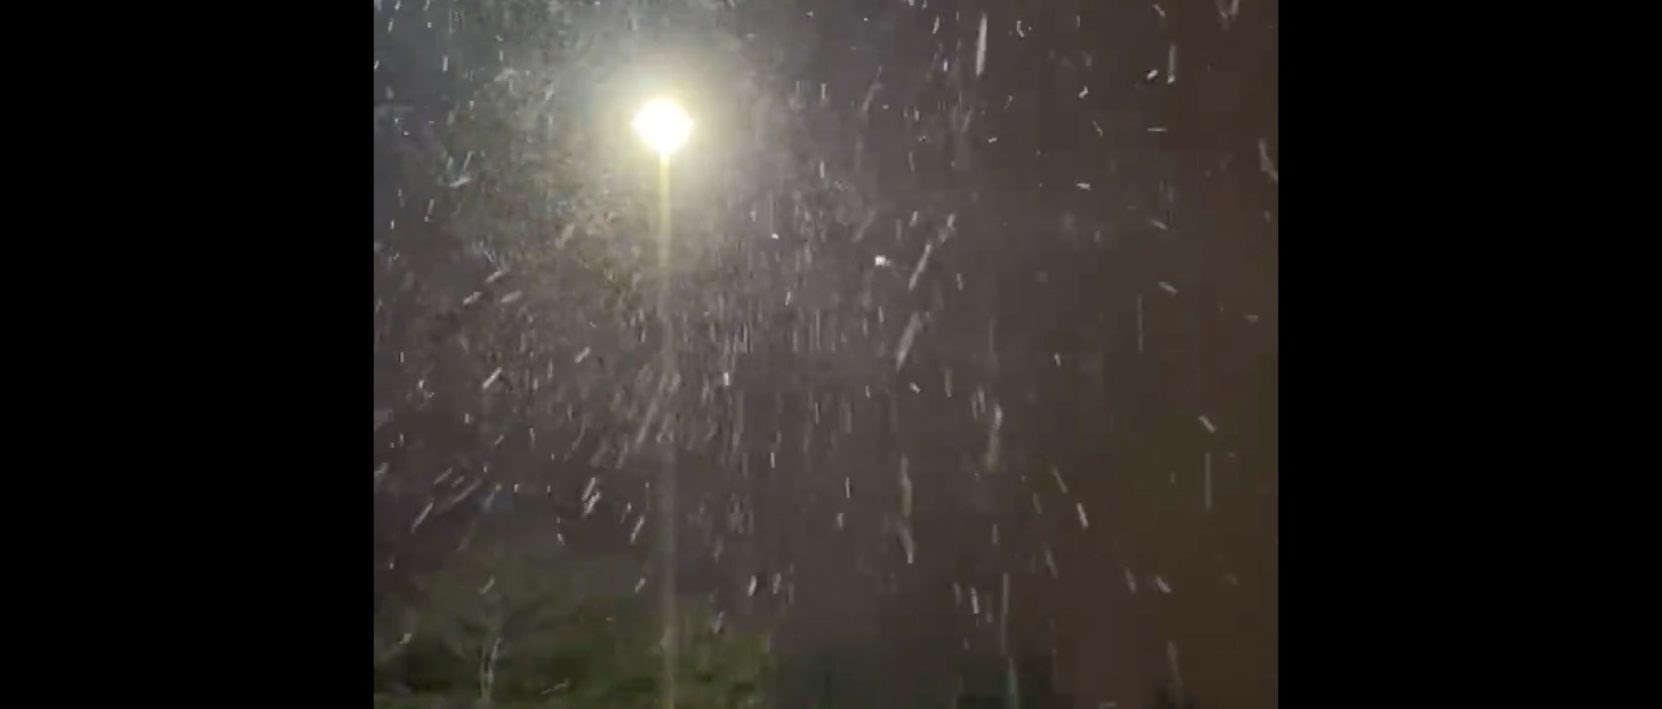 Snow Dusts Pocket Of The Florida Panhandle